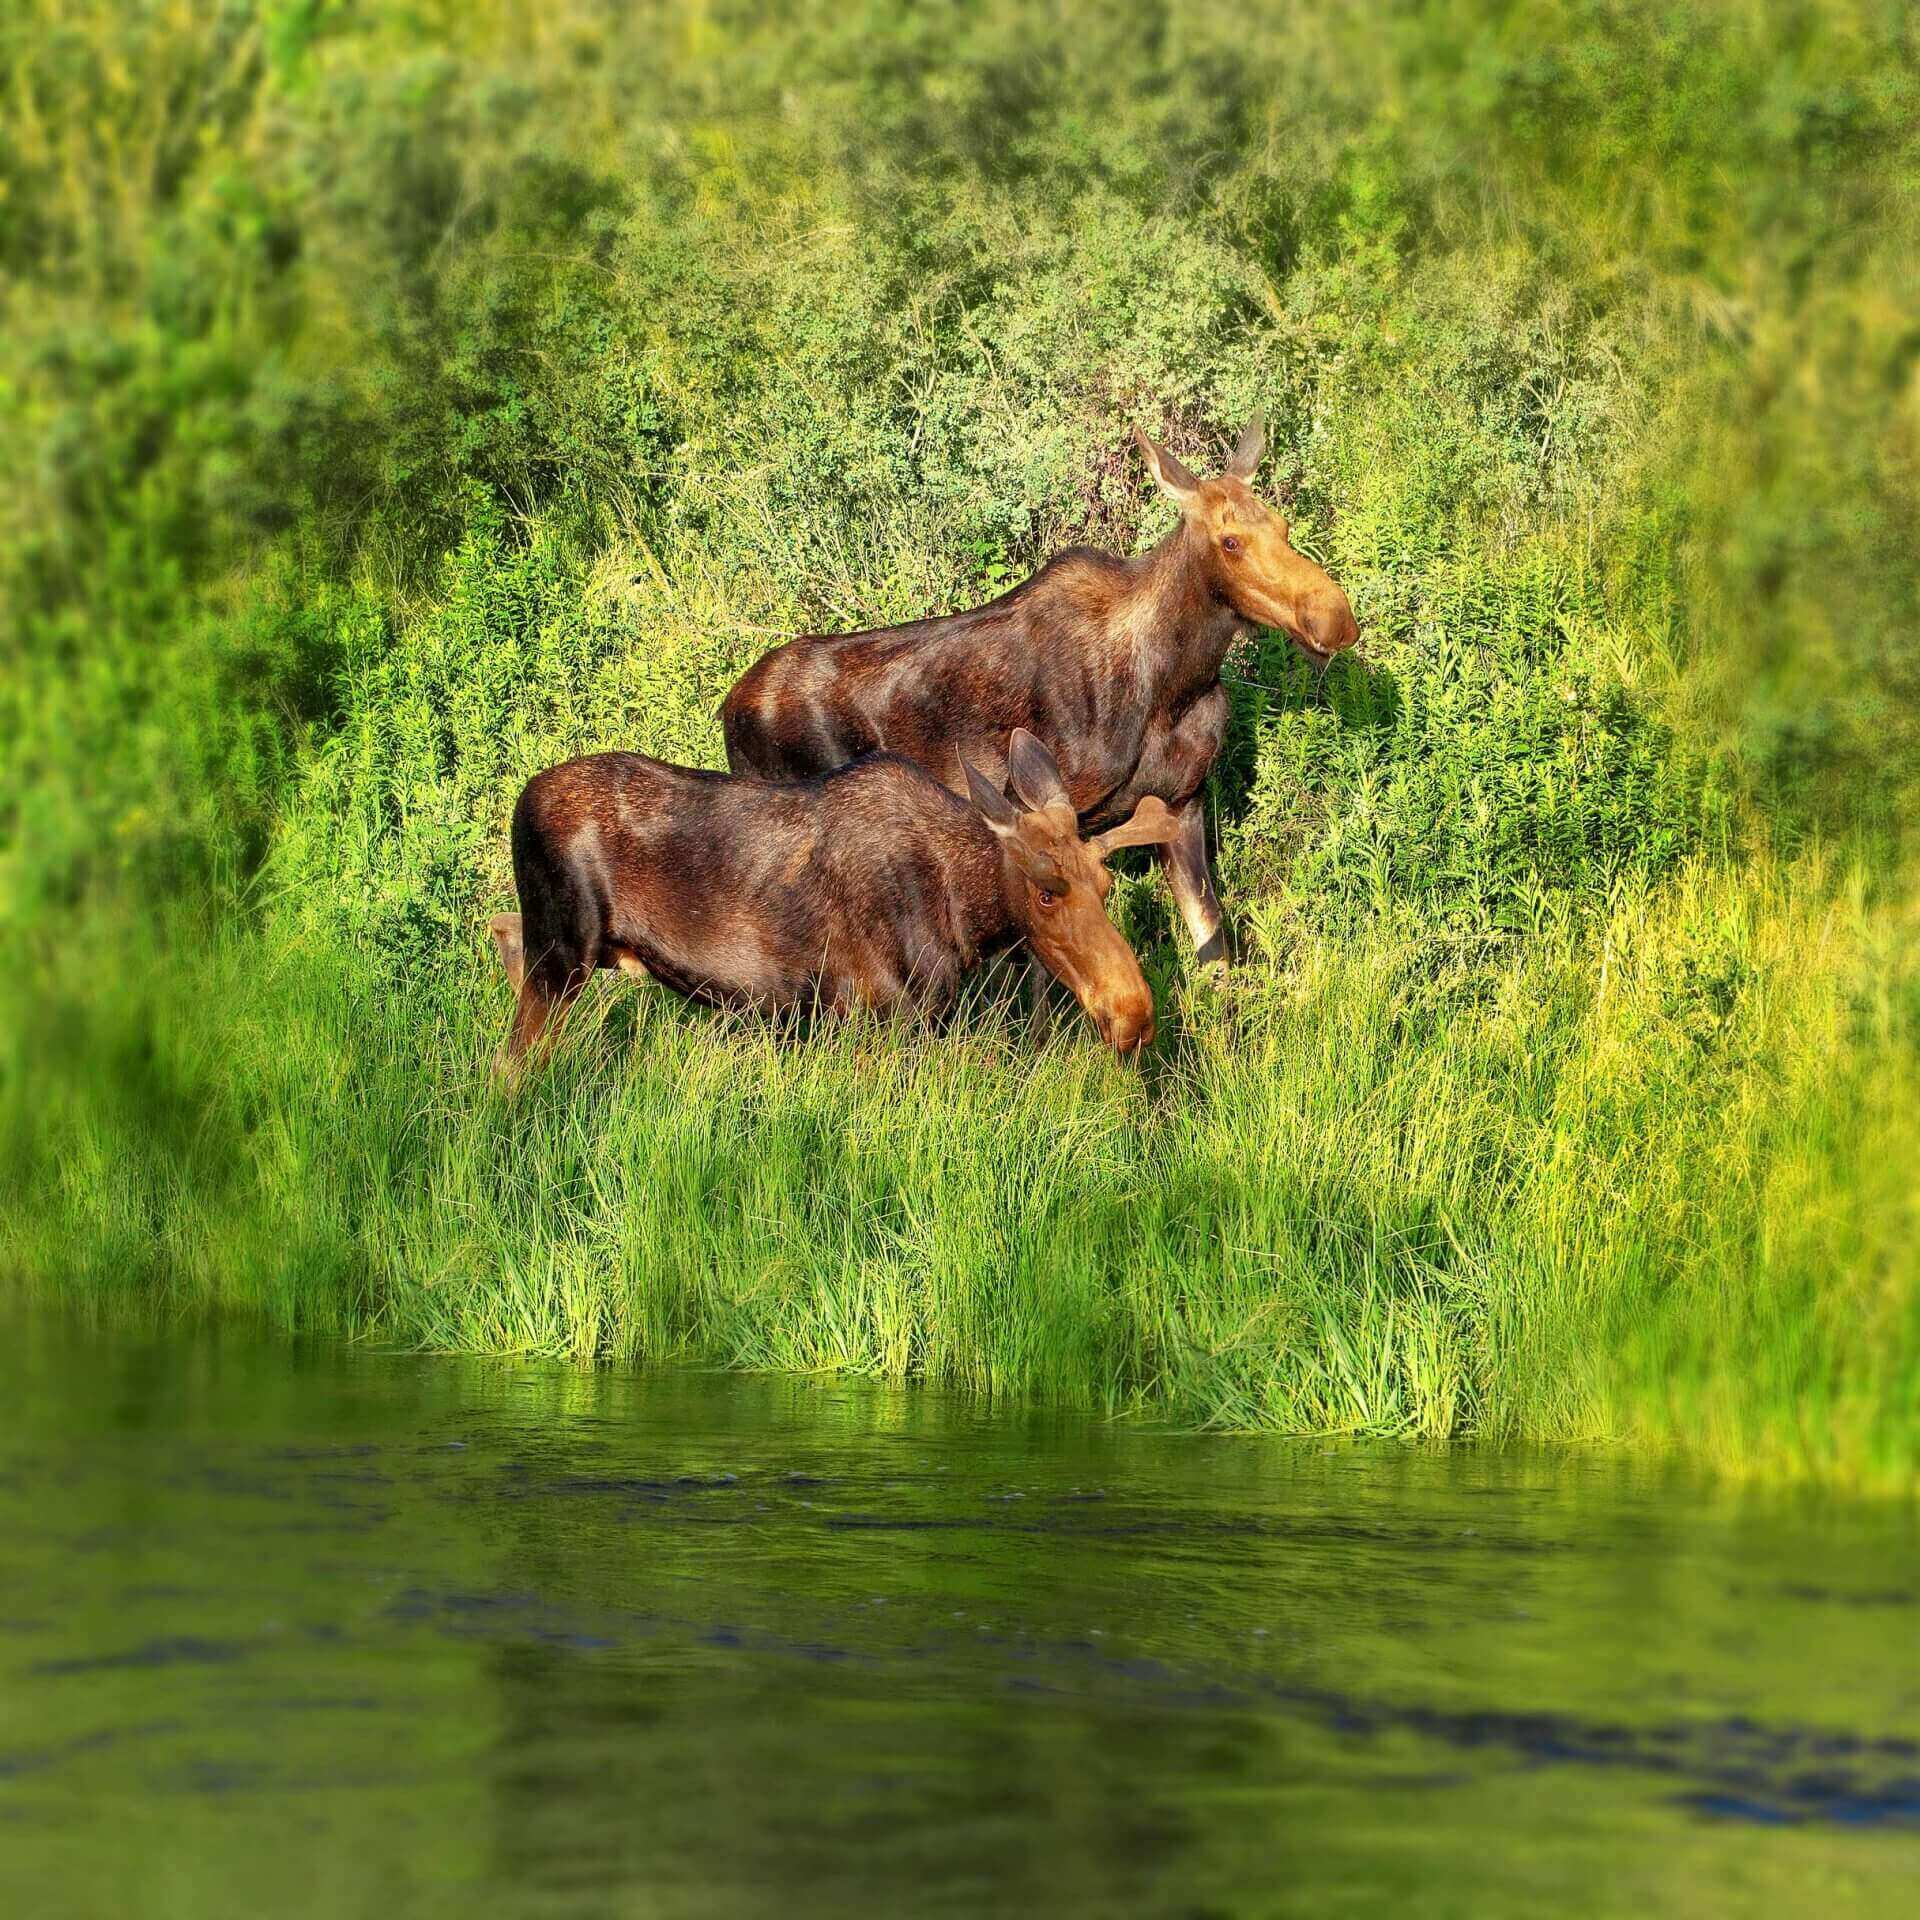 two young moose walking in tall grass by river